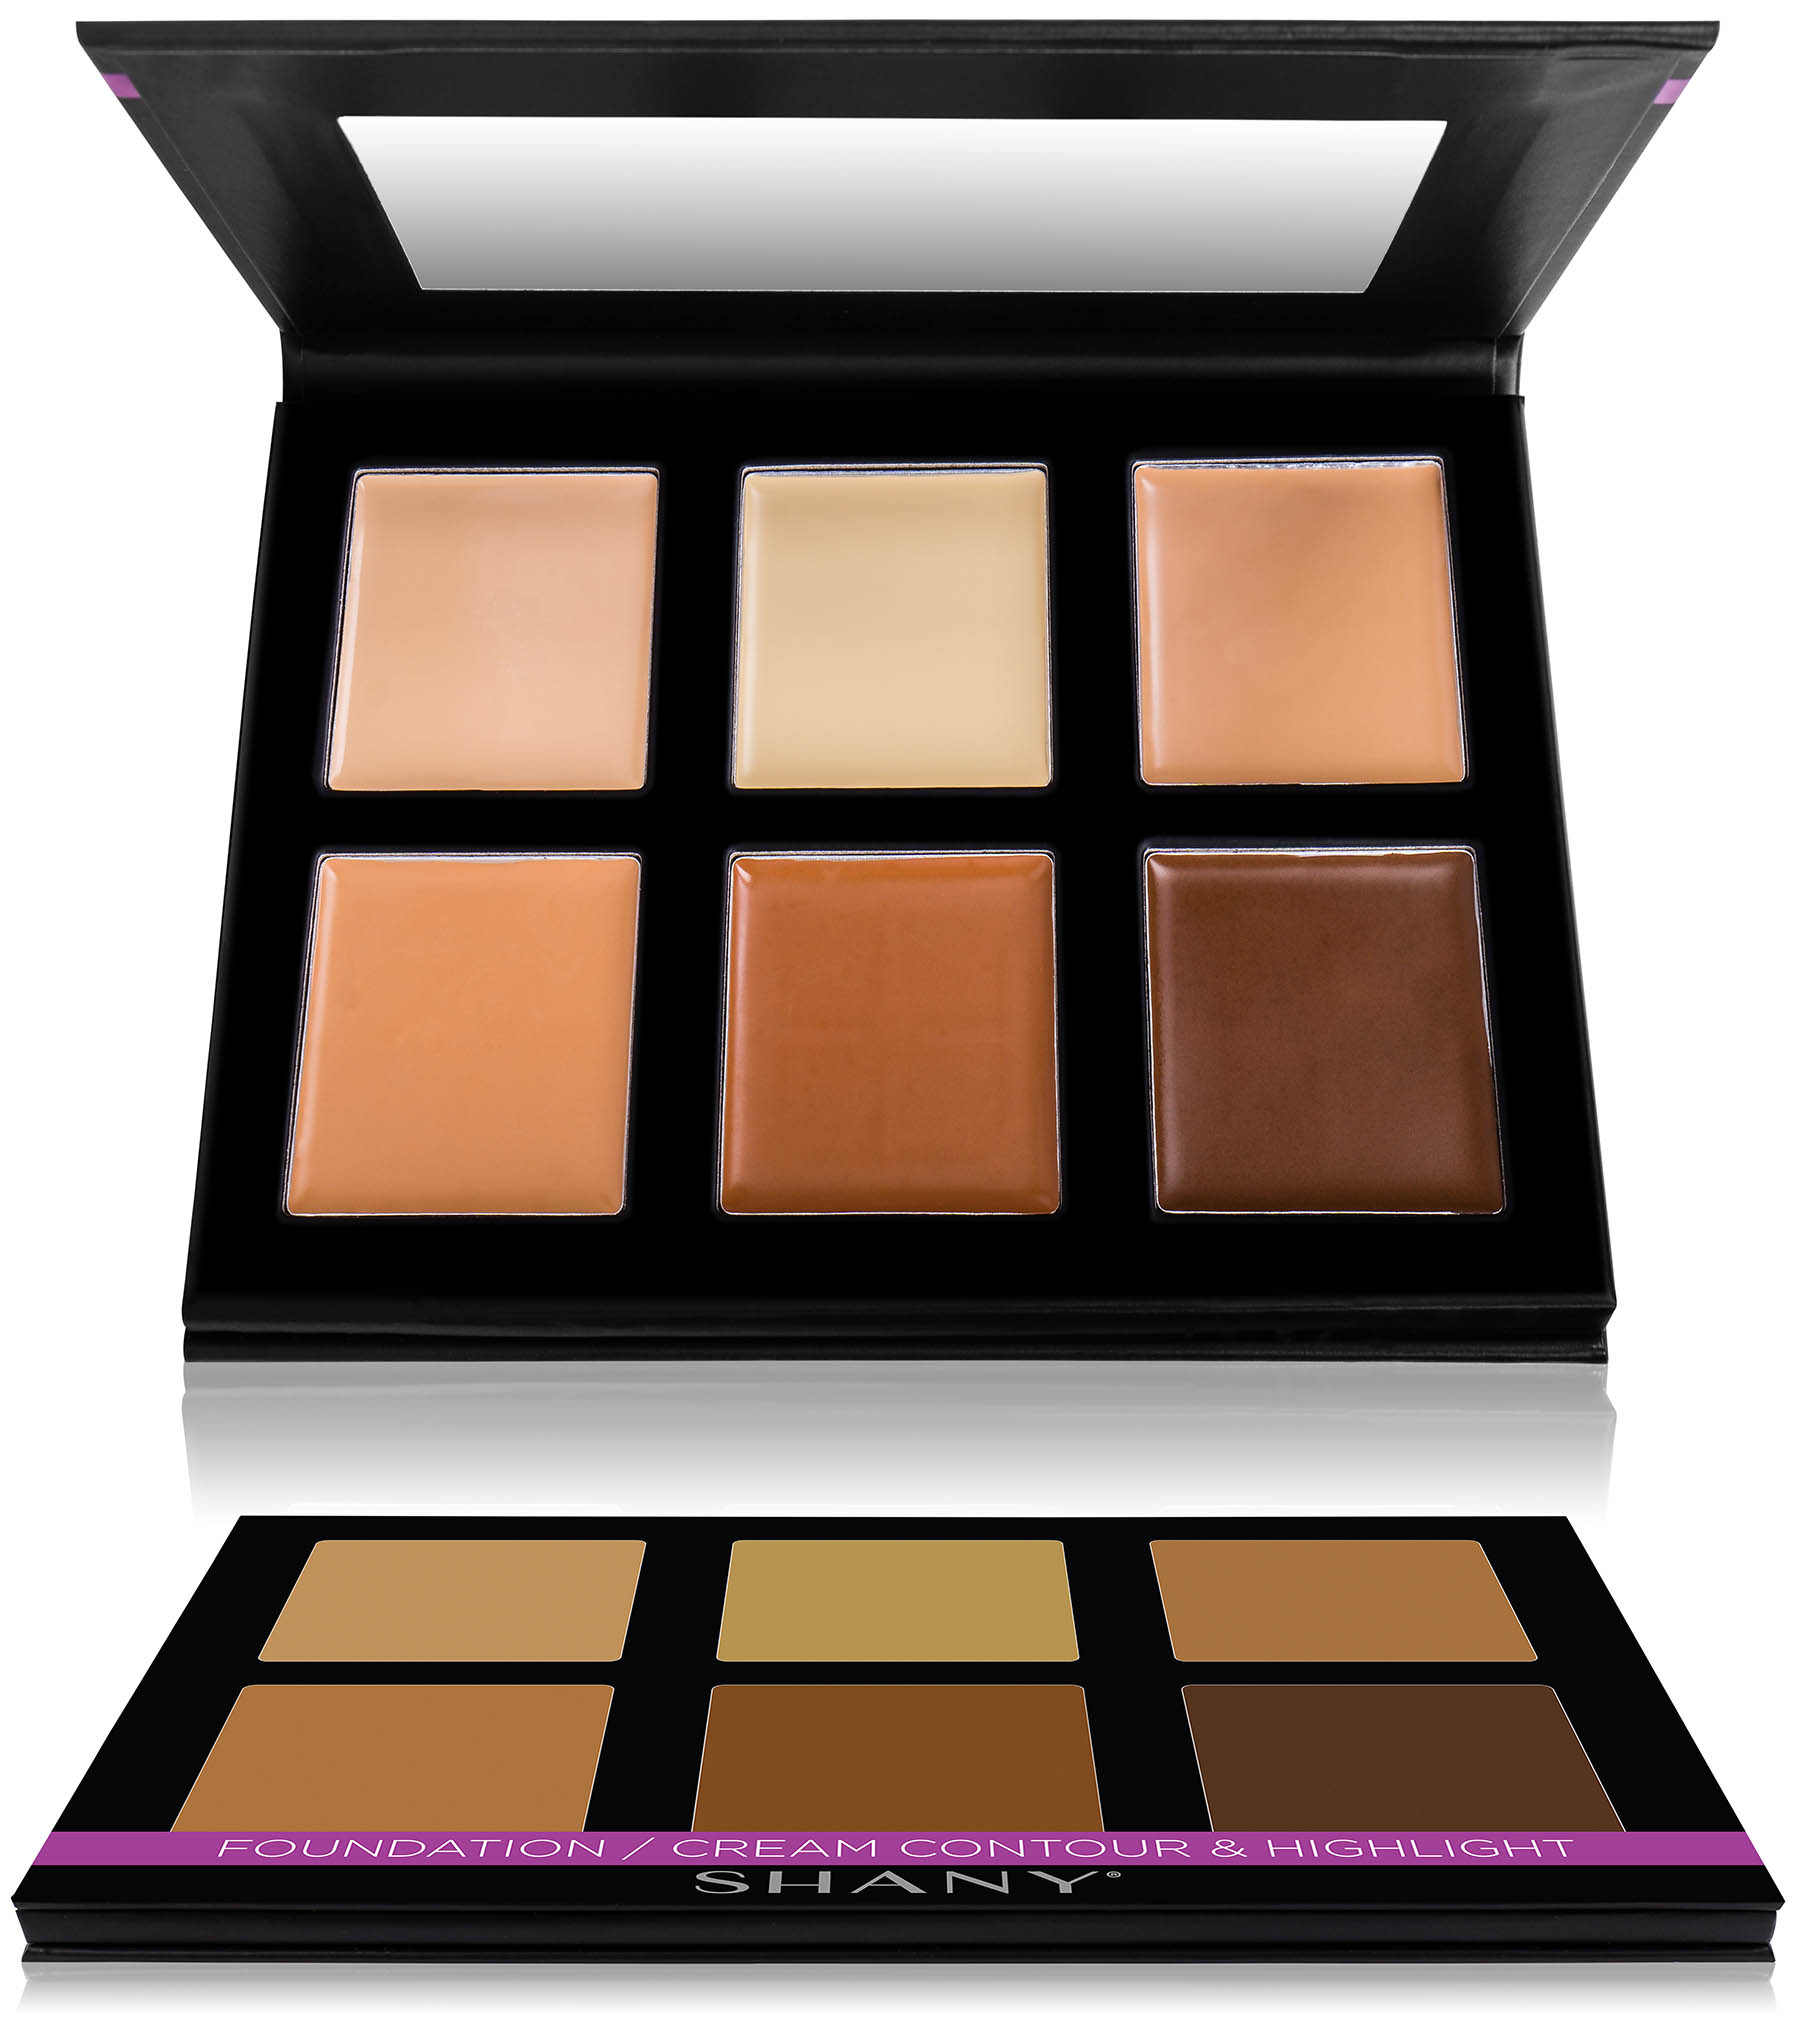 SHANY Foundation Cream Contour & Highlight Makeup Palette with Mirror - 6  Color Foundation Palette - FOUNDATION 